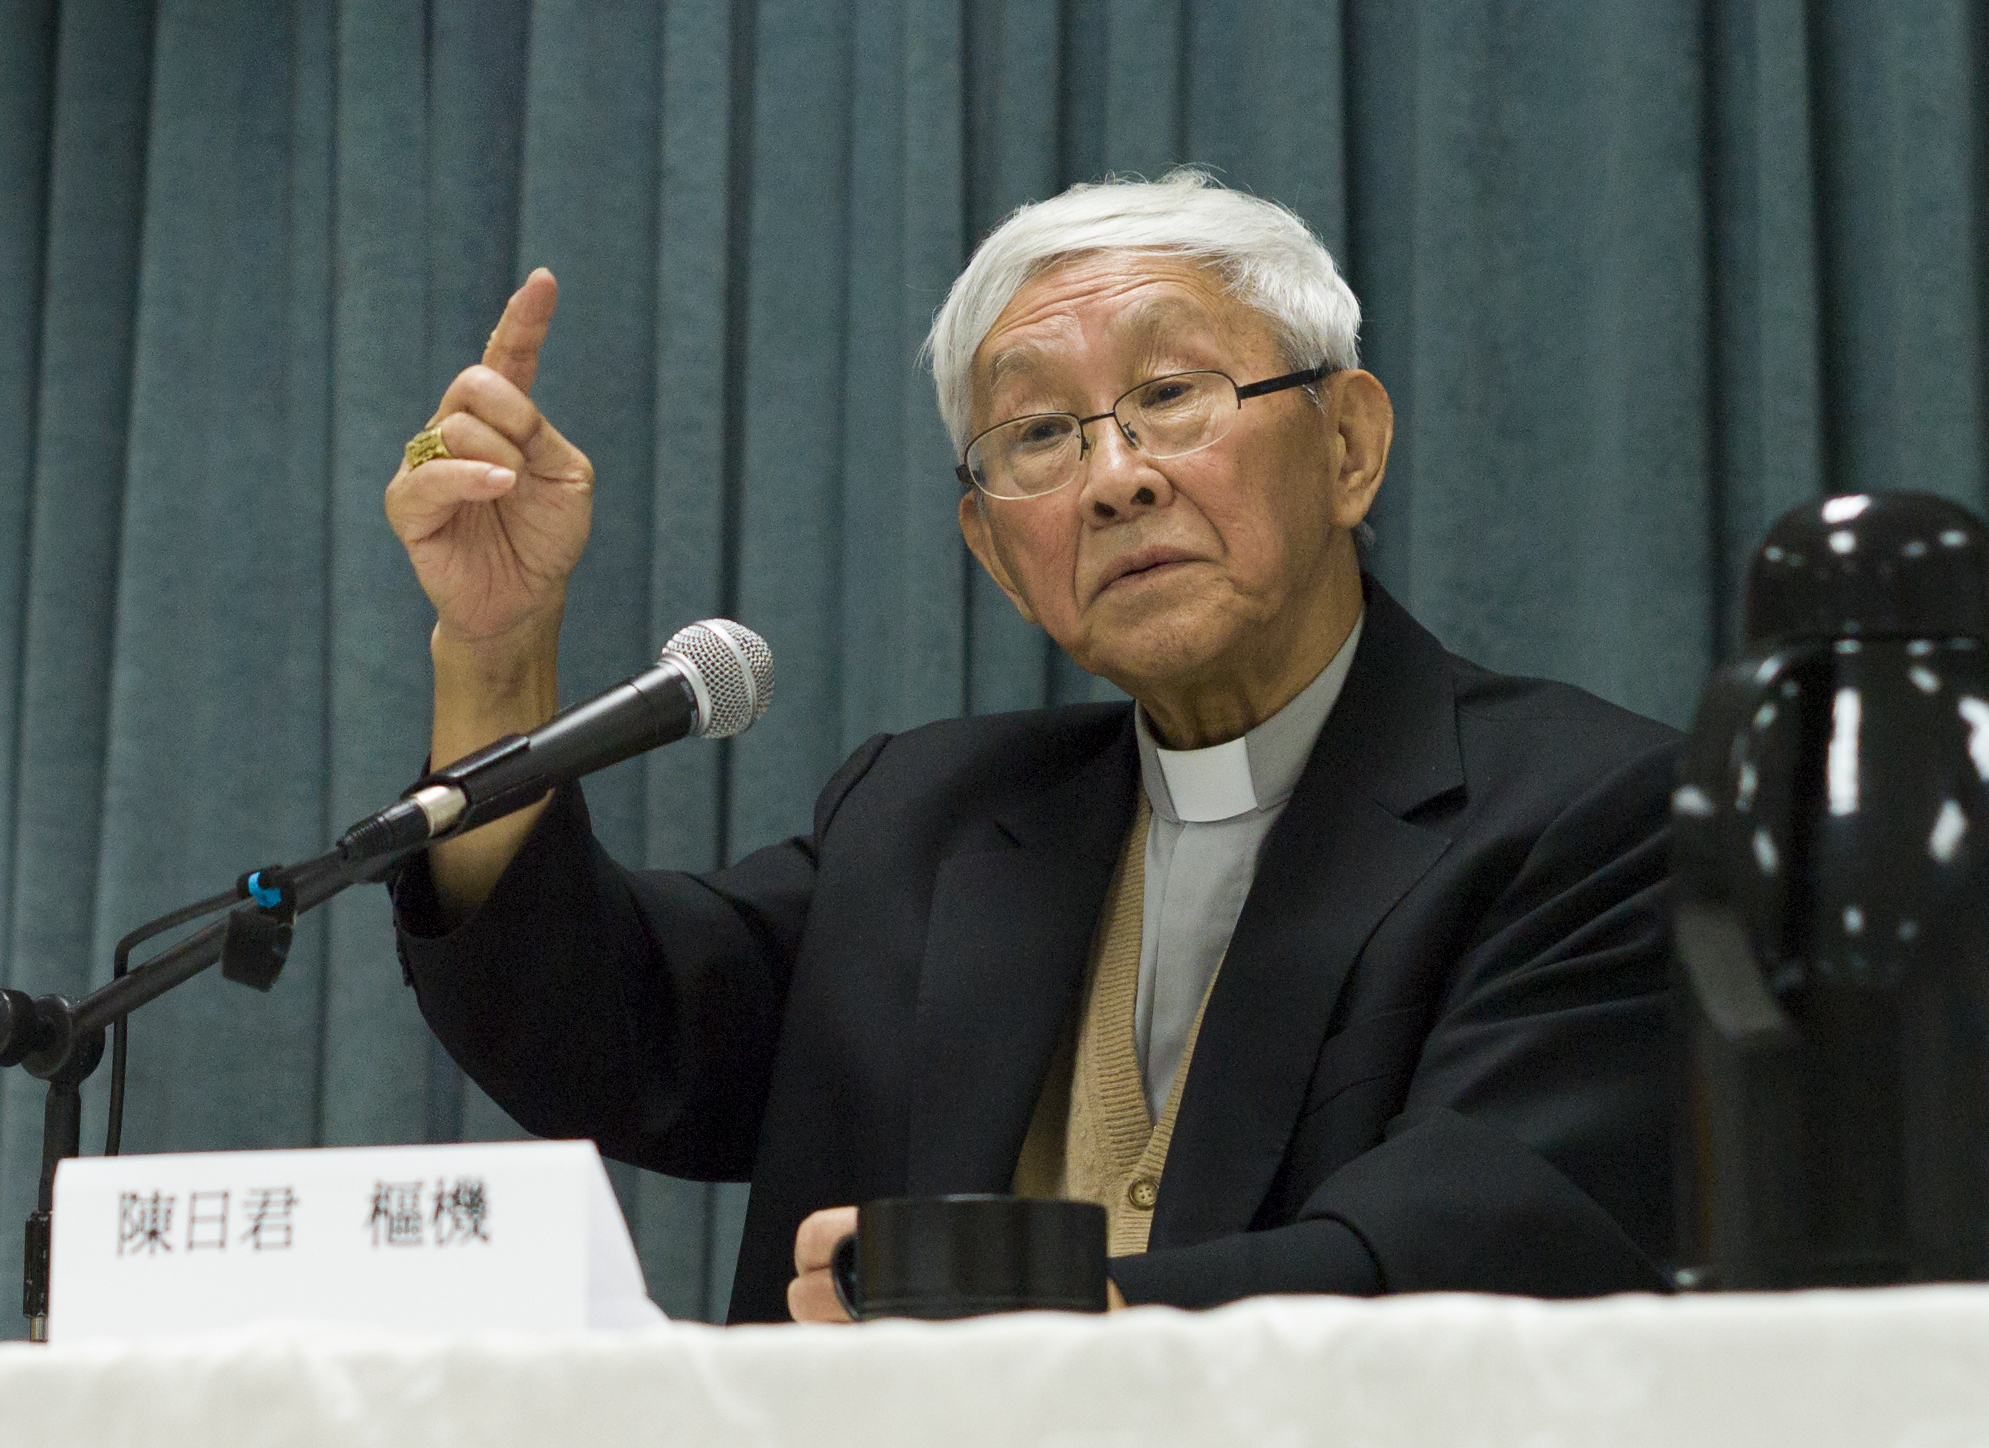 Zen appeals to Pope Francis on behalf of loyal Chinese bishops